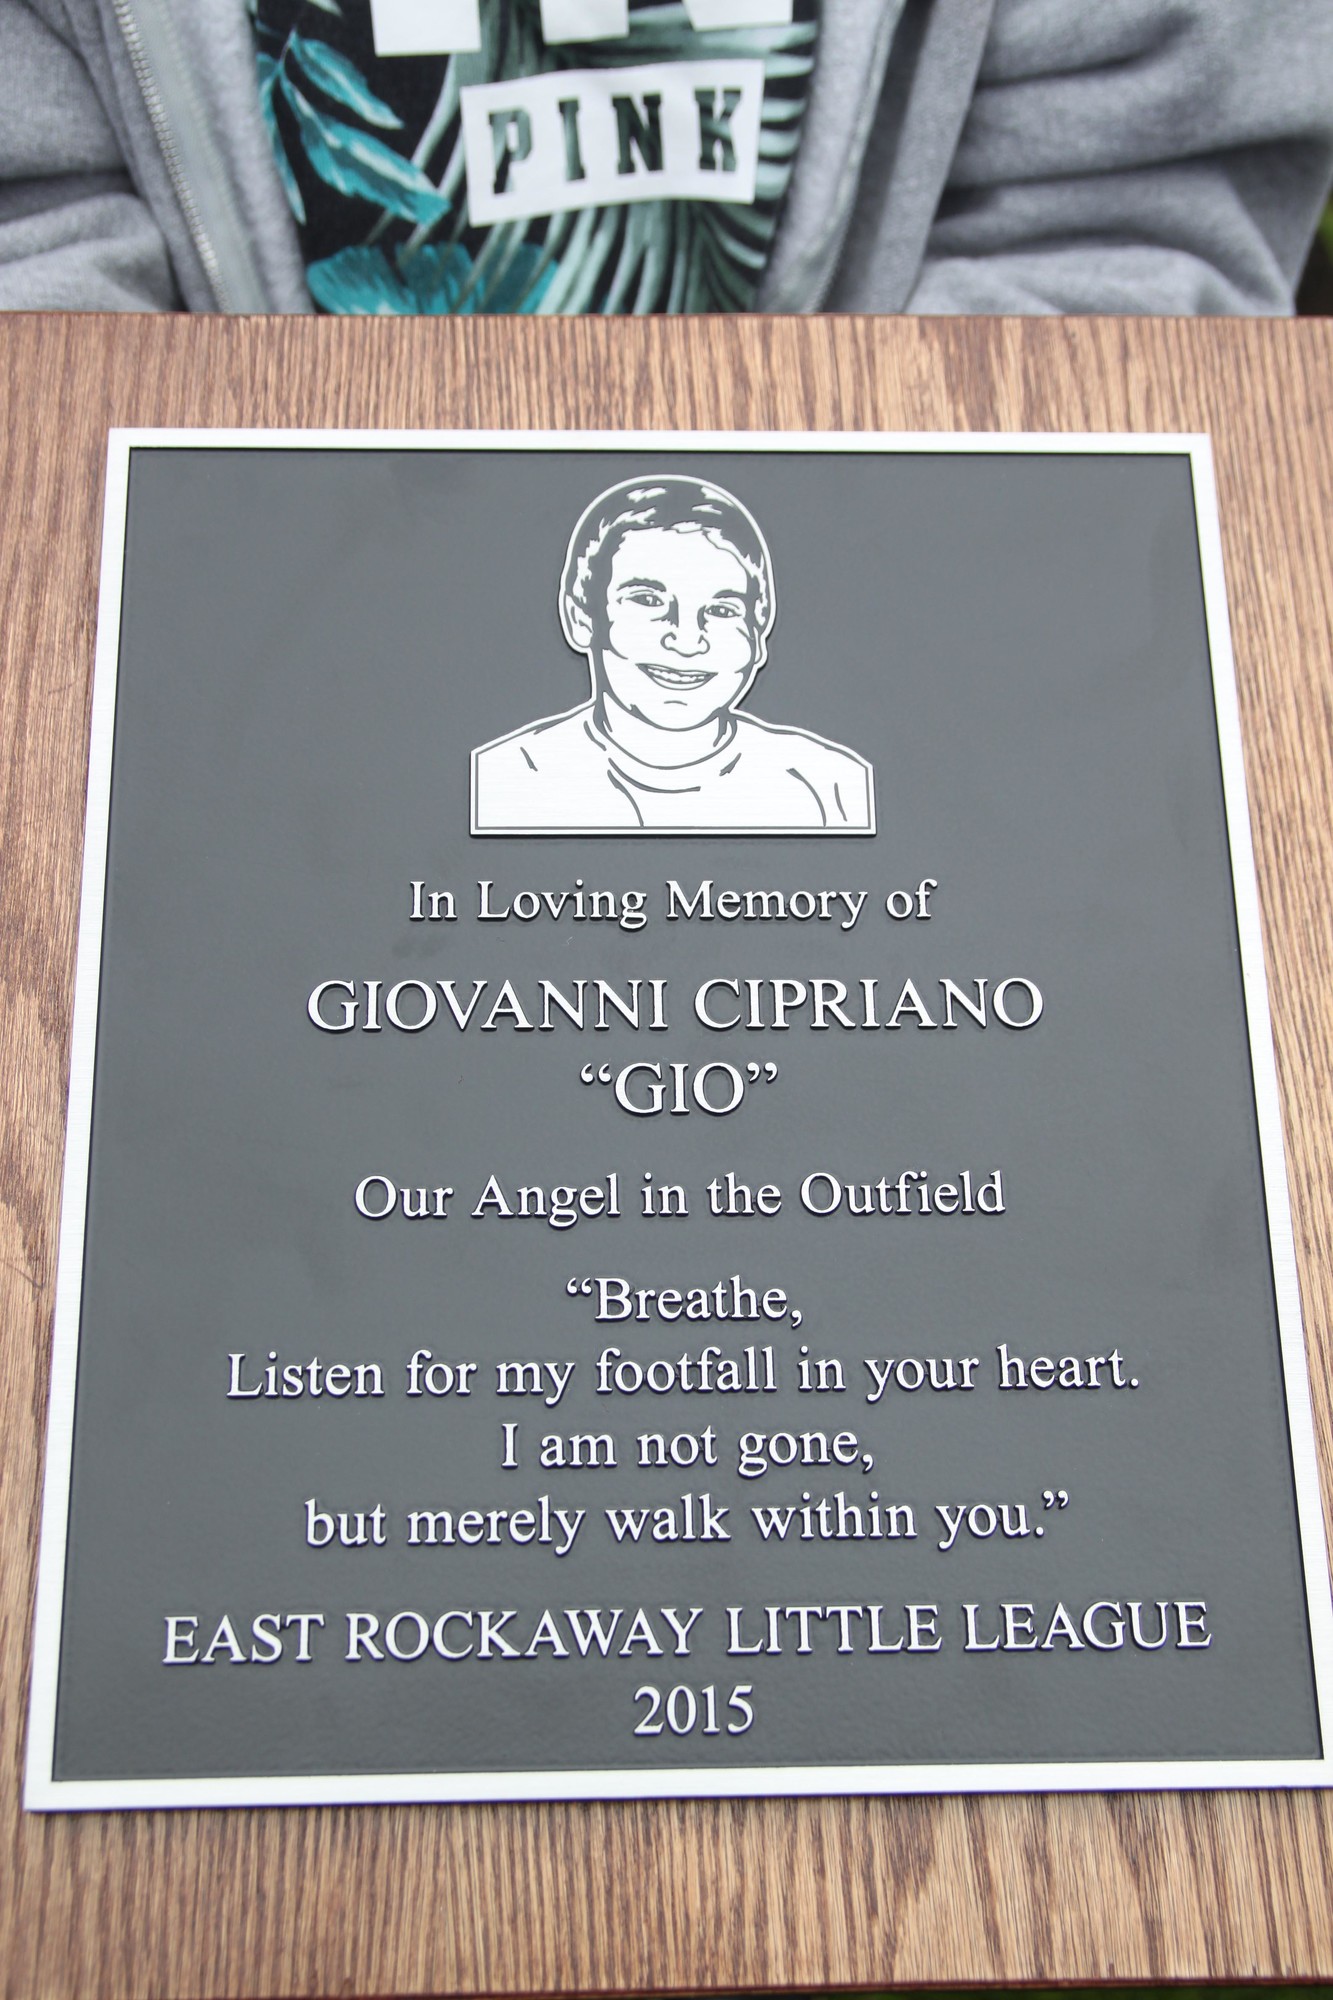 The plaque dedicated to Gio will be mounted on a stone next to the tree that was planted in his honor.